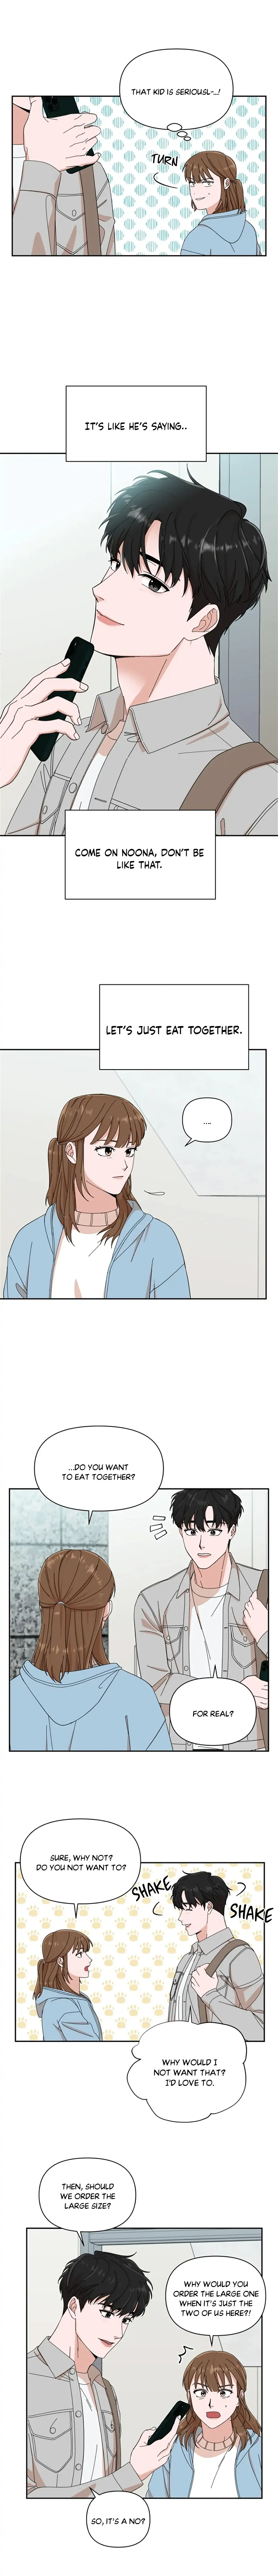 The Man with Pretty Lips Chapter 4 - Page 33